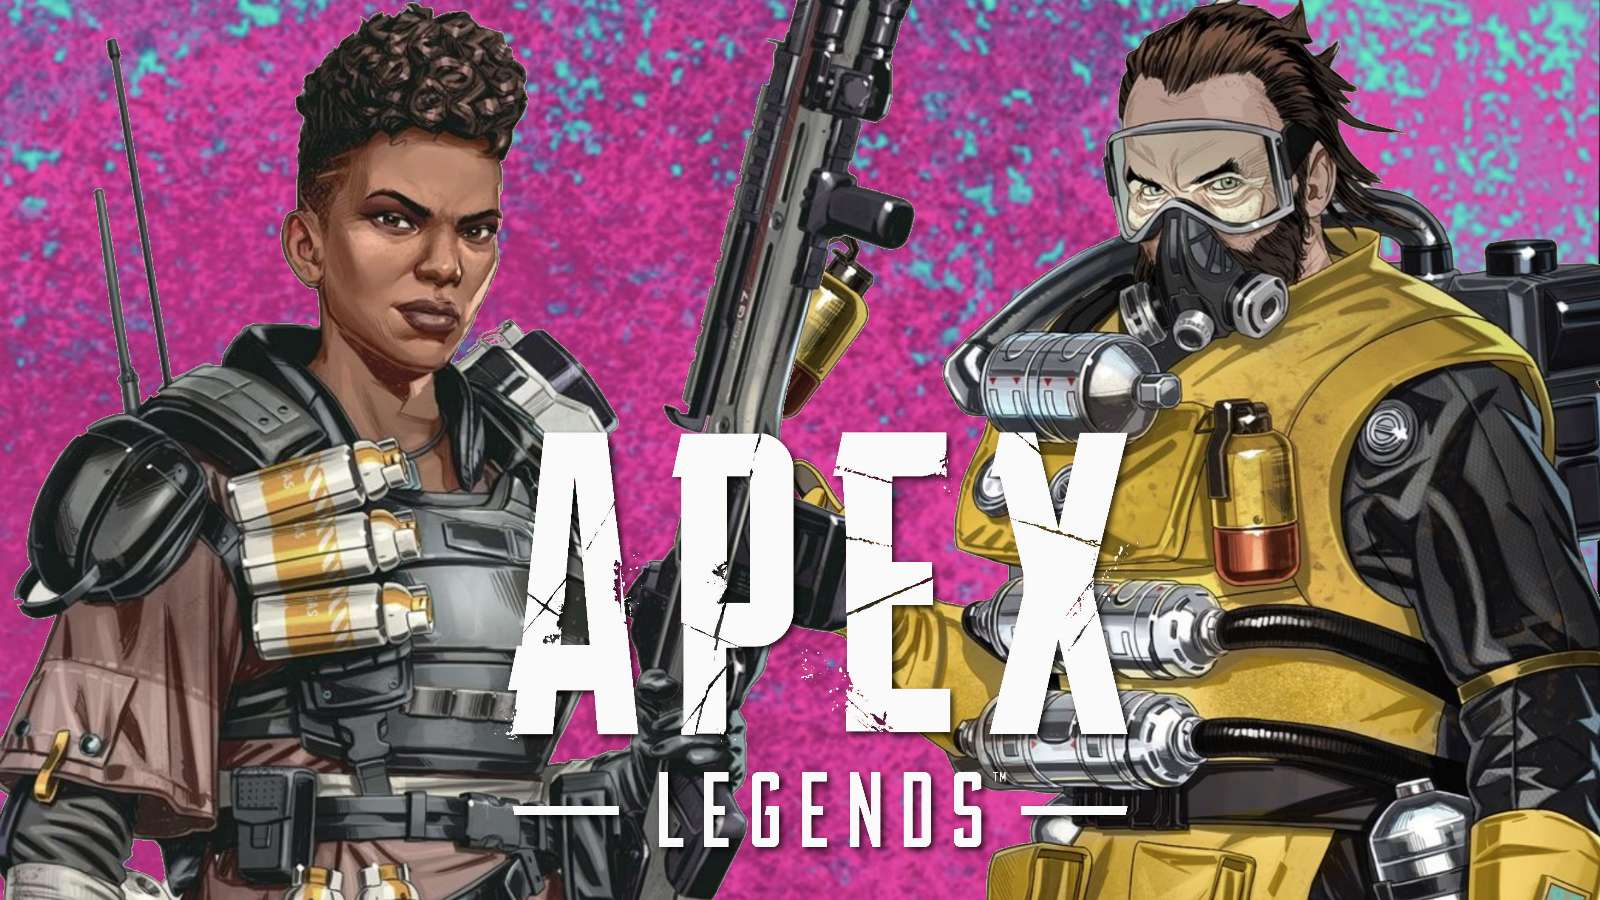 Bangalore and Caustic in Apex Legends pink background